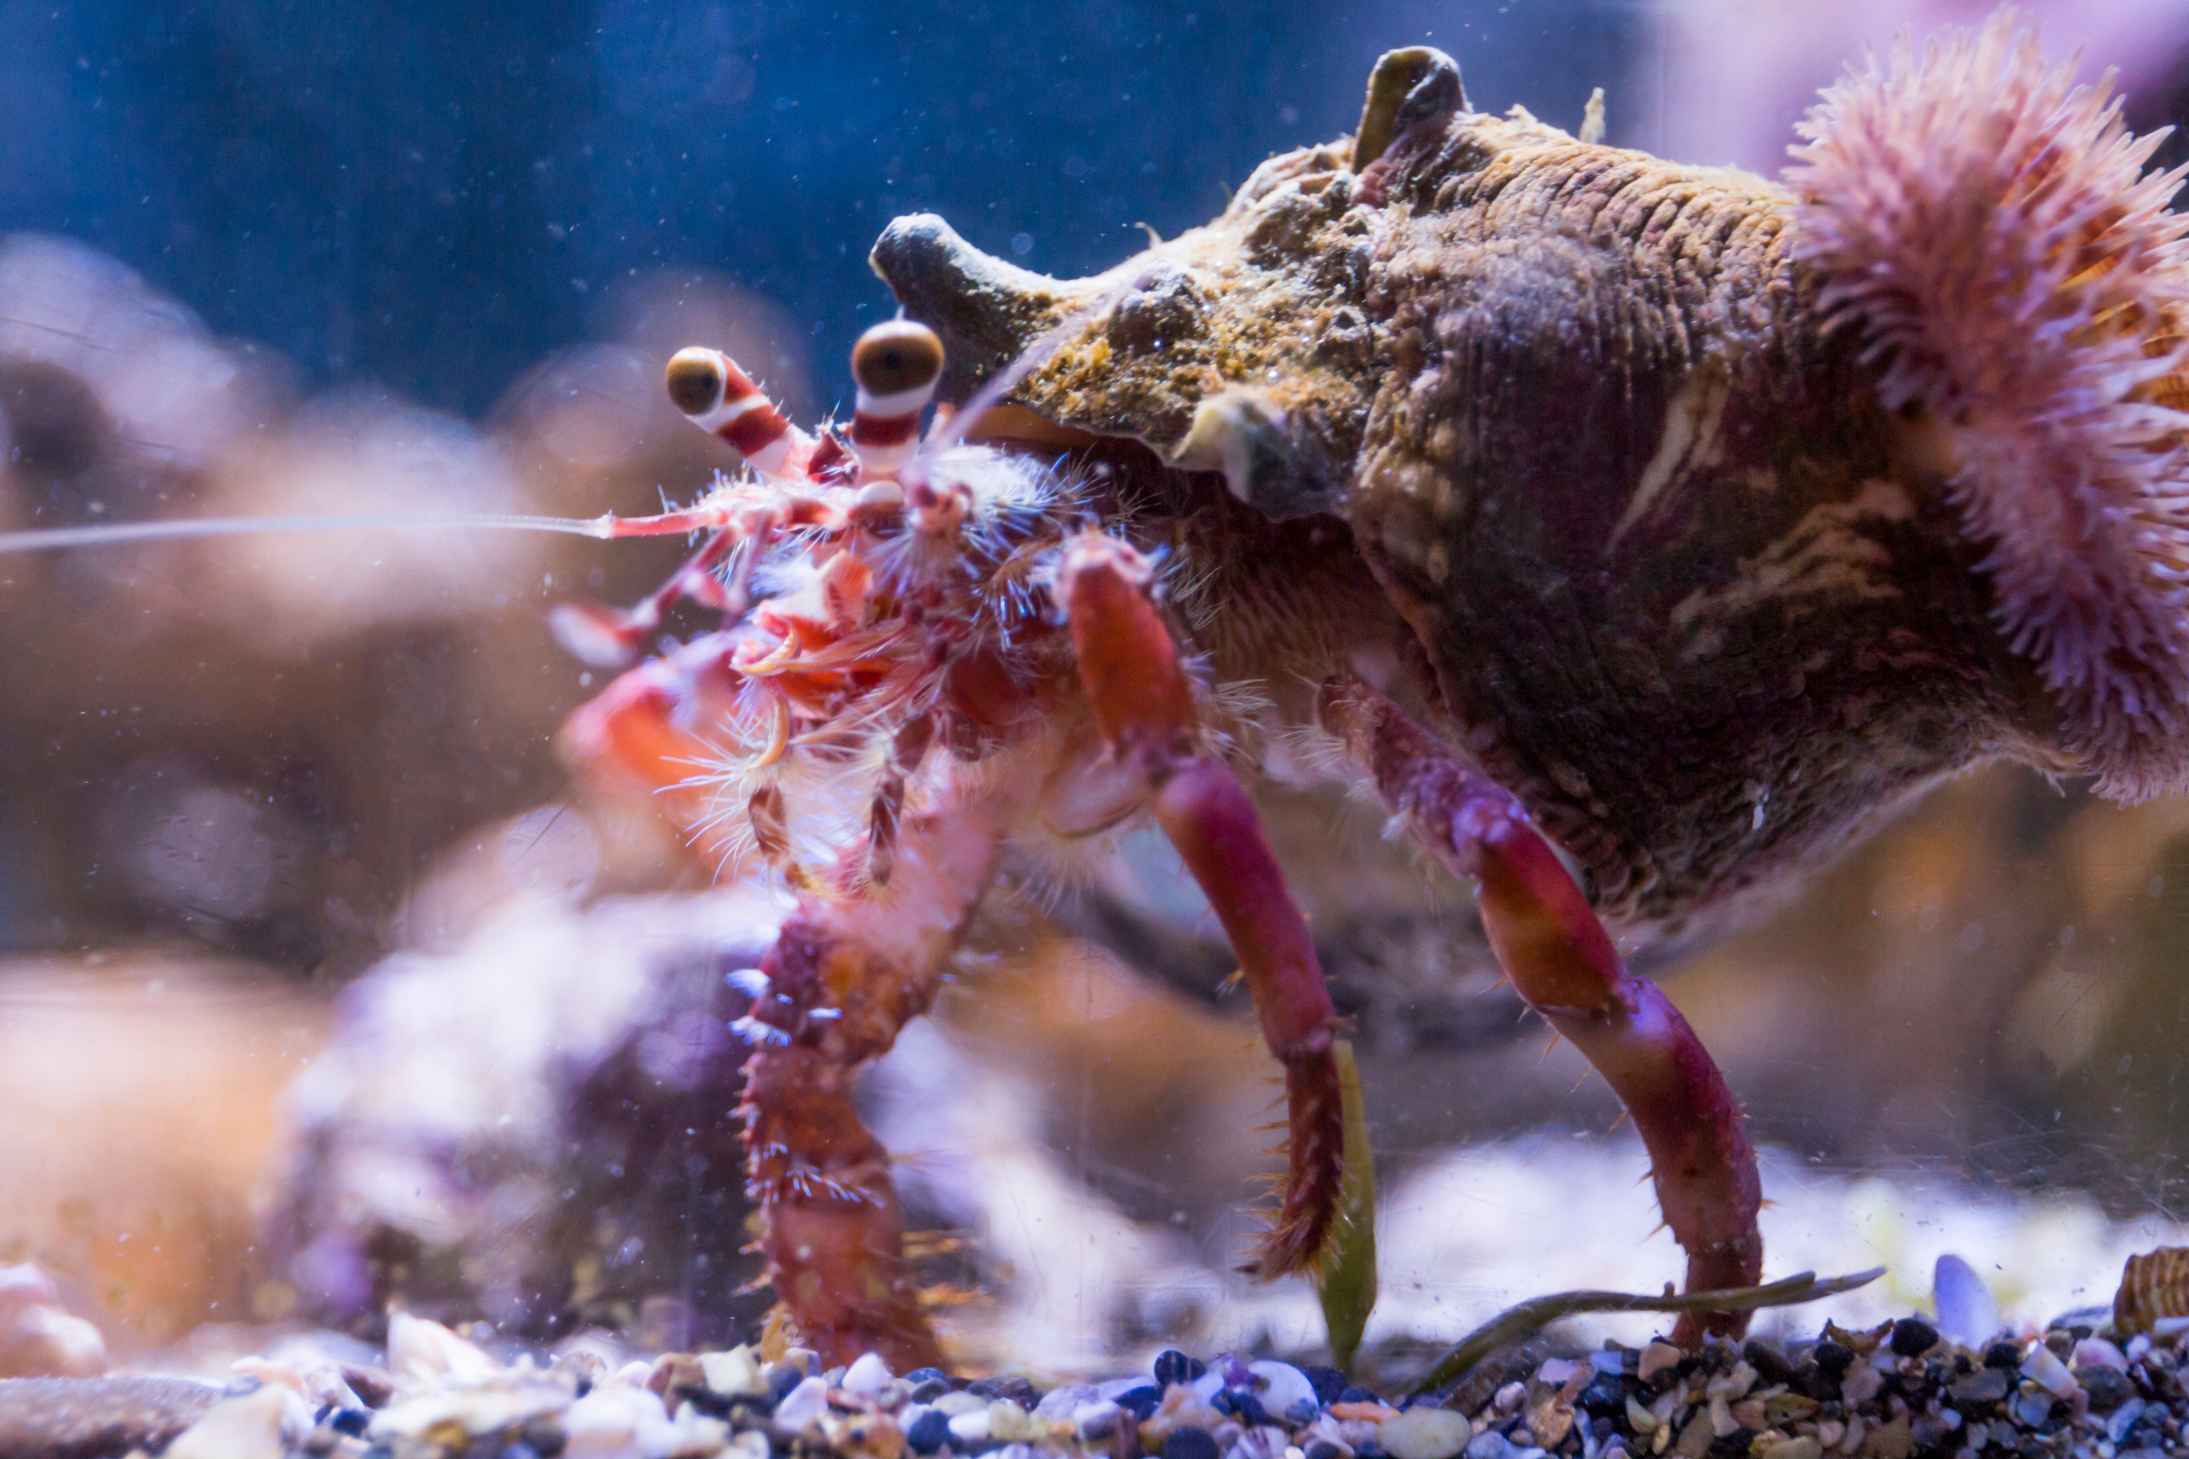 Anemone hermit crab in water